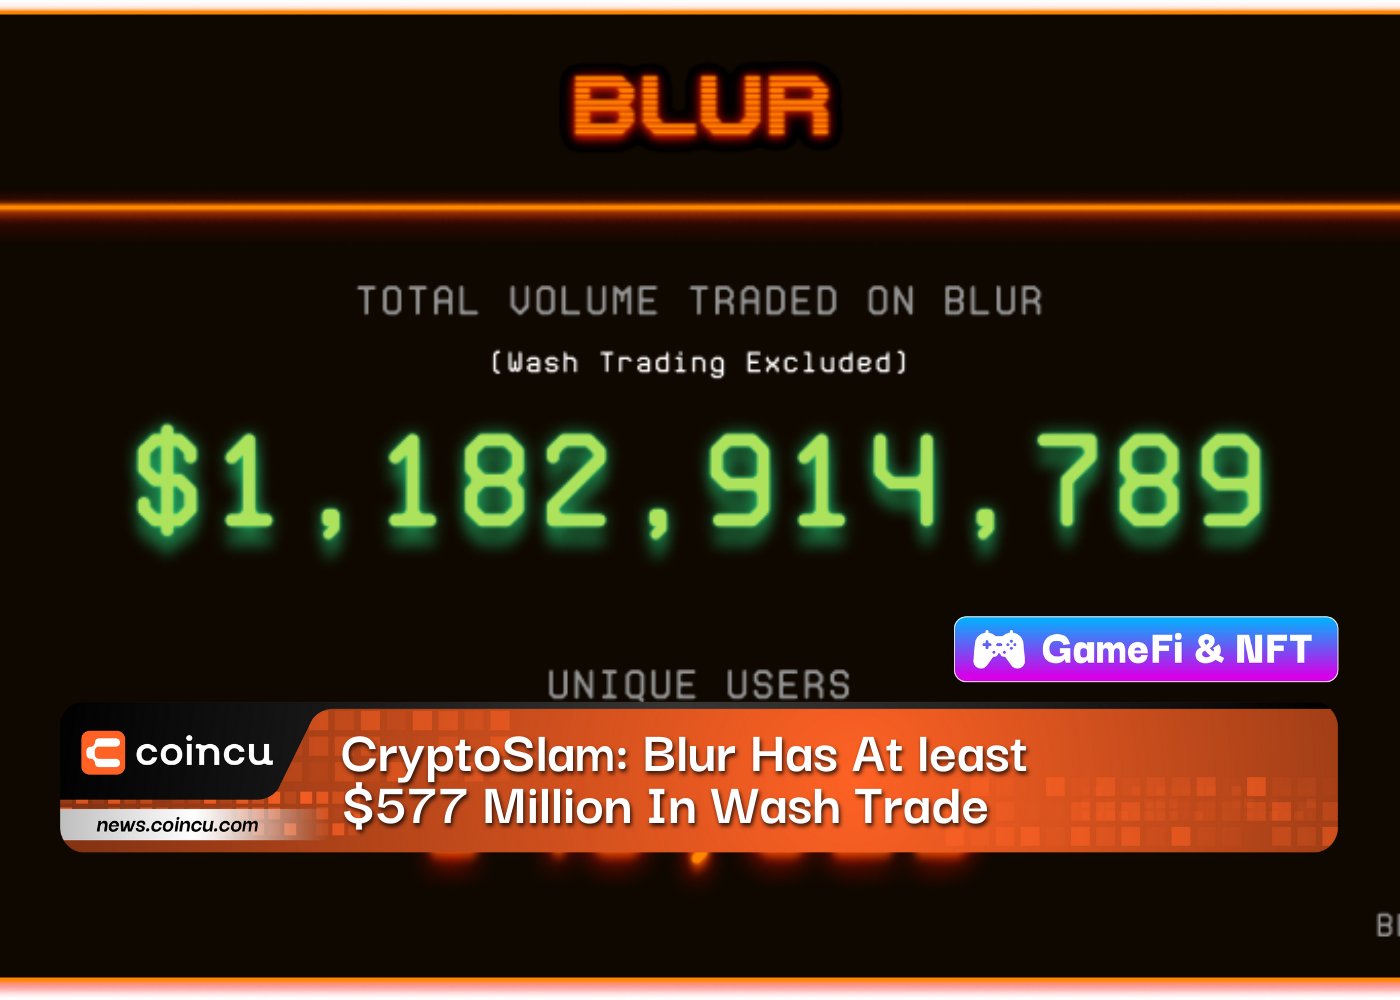 CryptoSlam: Blur Has At least $577 Million In Wash Trade